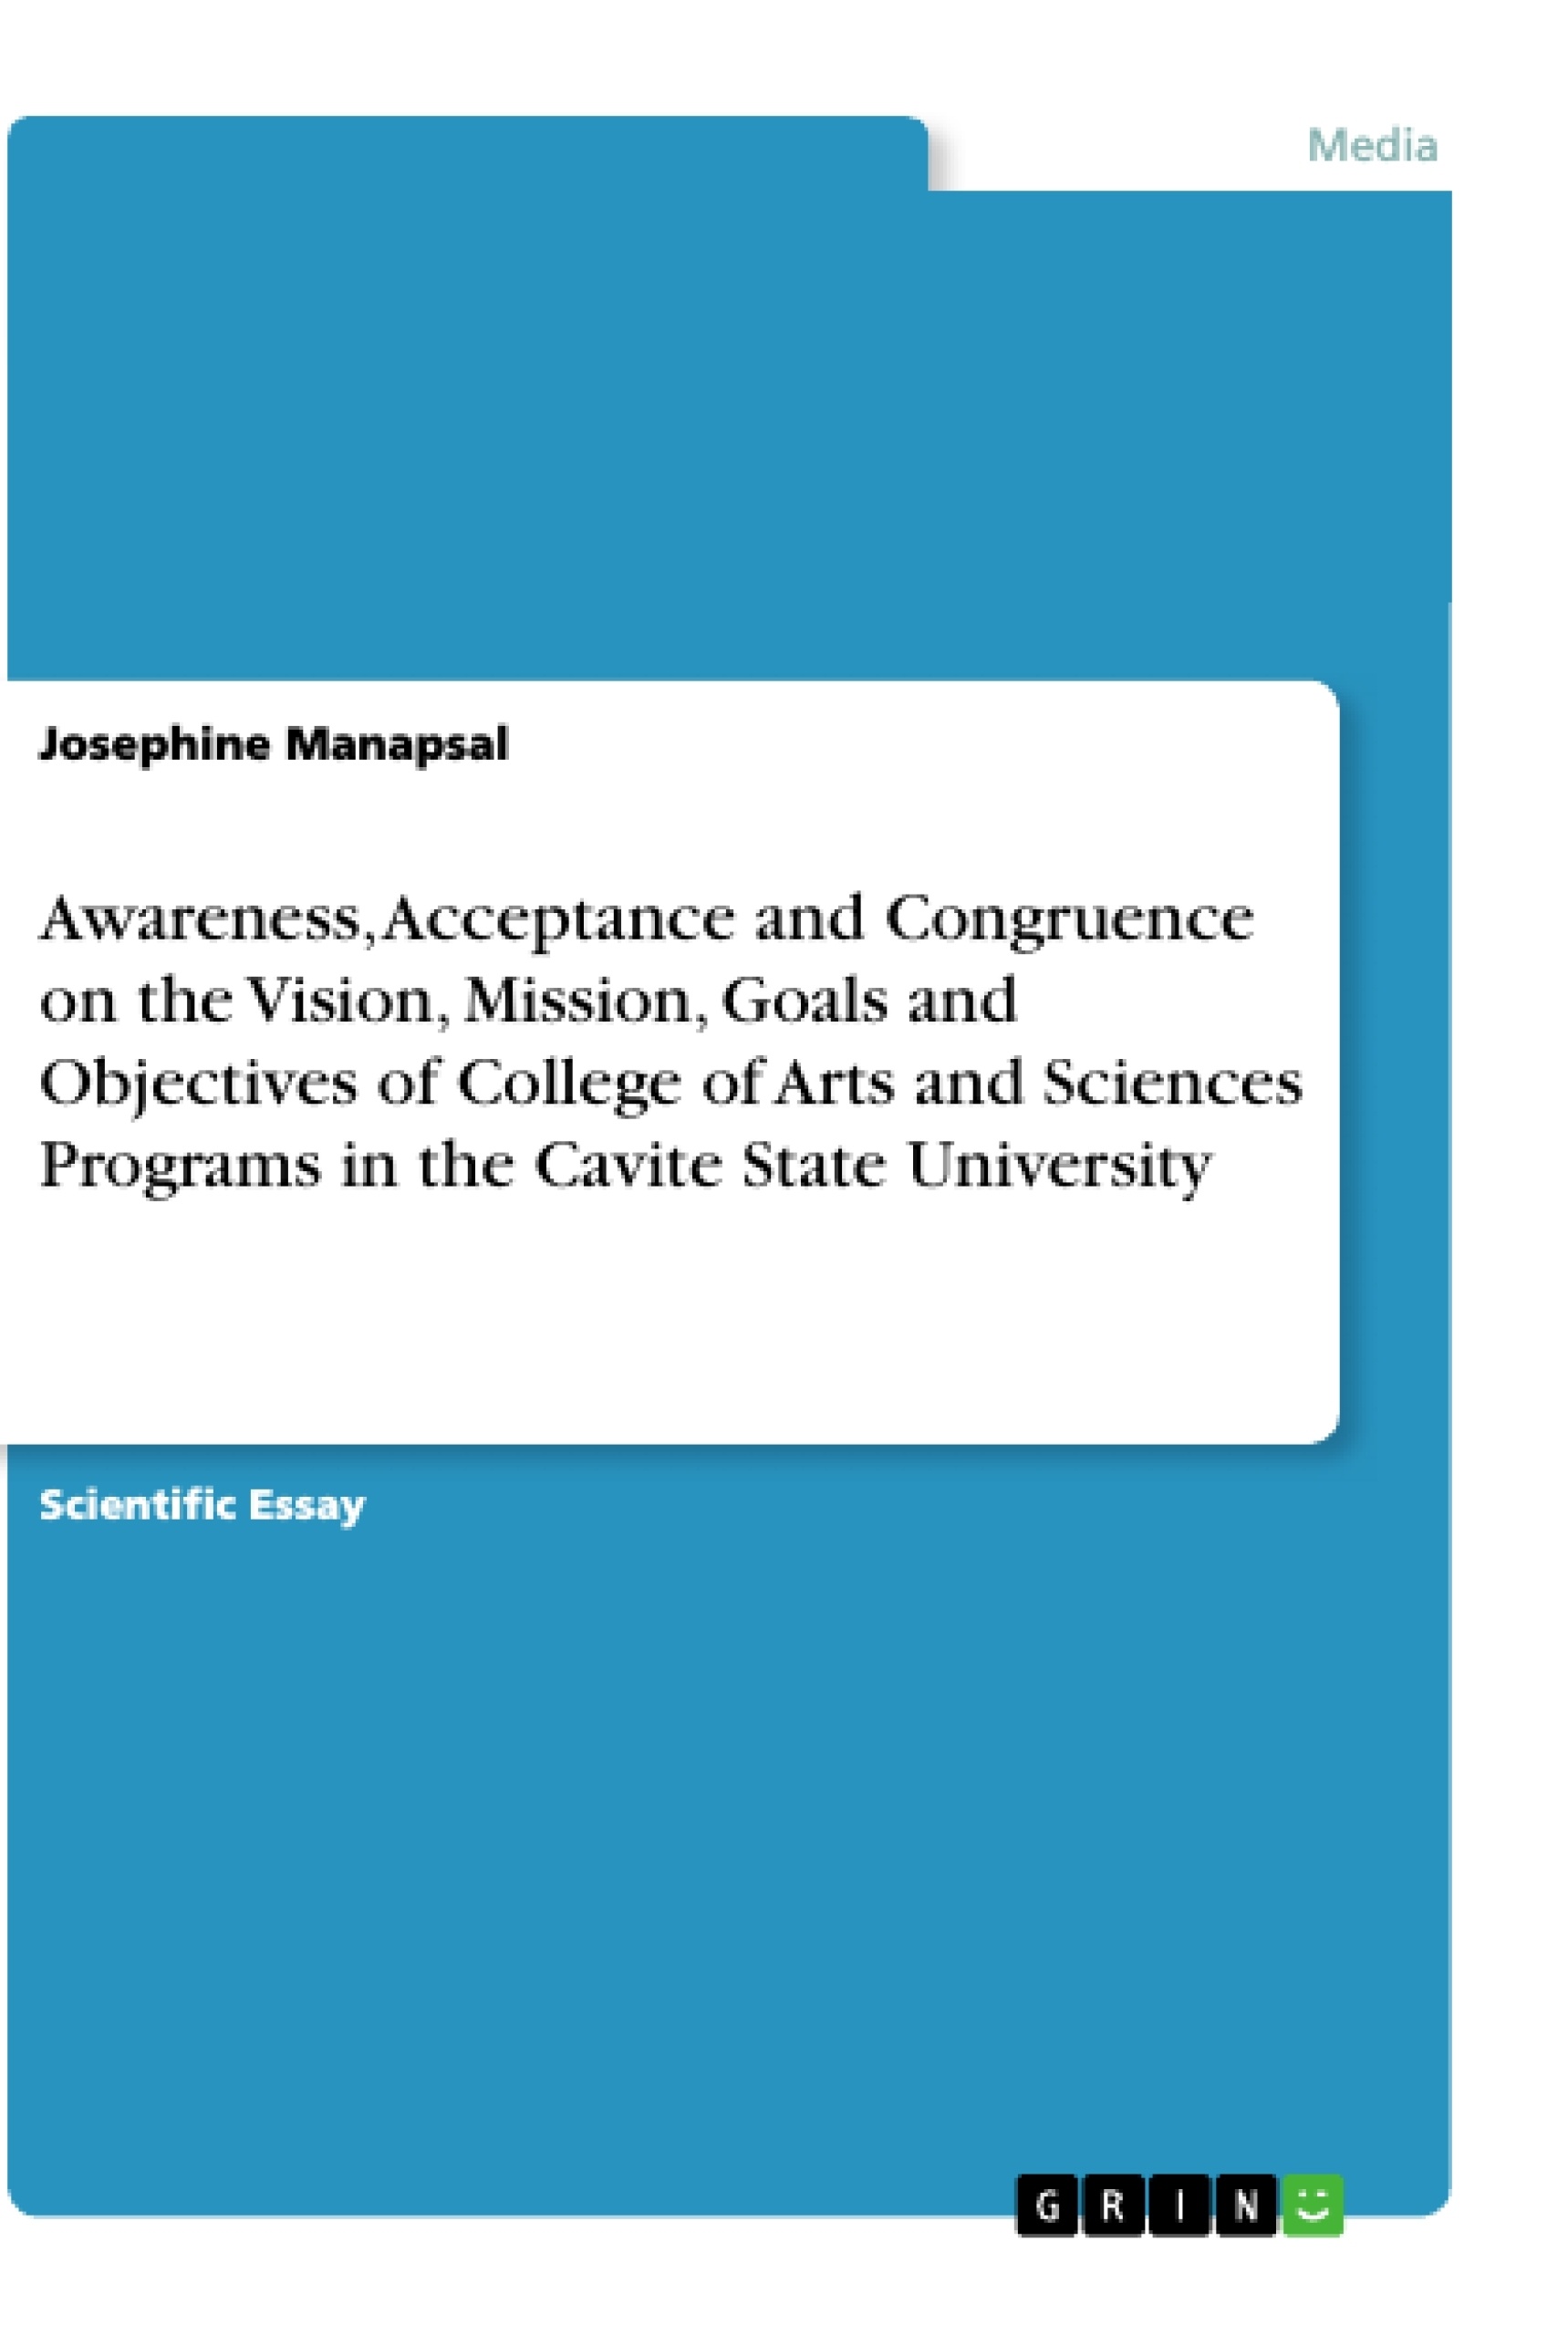 Título: Awareness, Acceptance and Congruence on the Vision, Mission, Goals and Objectives of College of Arts and Sciences Programs in the Cavite State University